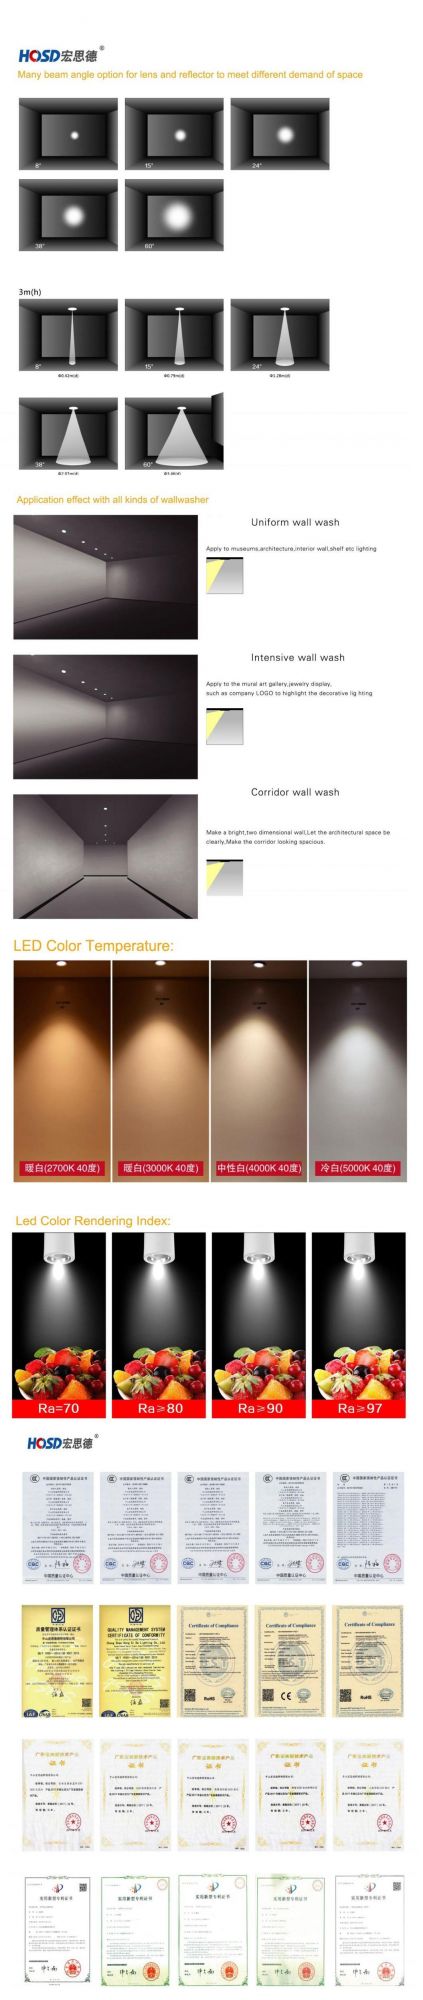 CE 35W 45W 4wire 3phase Ra>95 LED Track Light for Commercial Clothes Chain Store Shops Shopping Mall Exhibition Hall